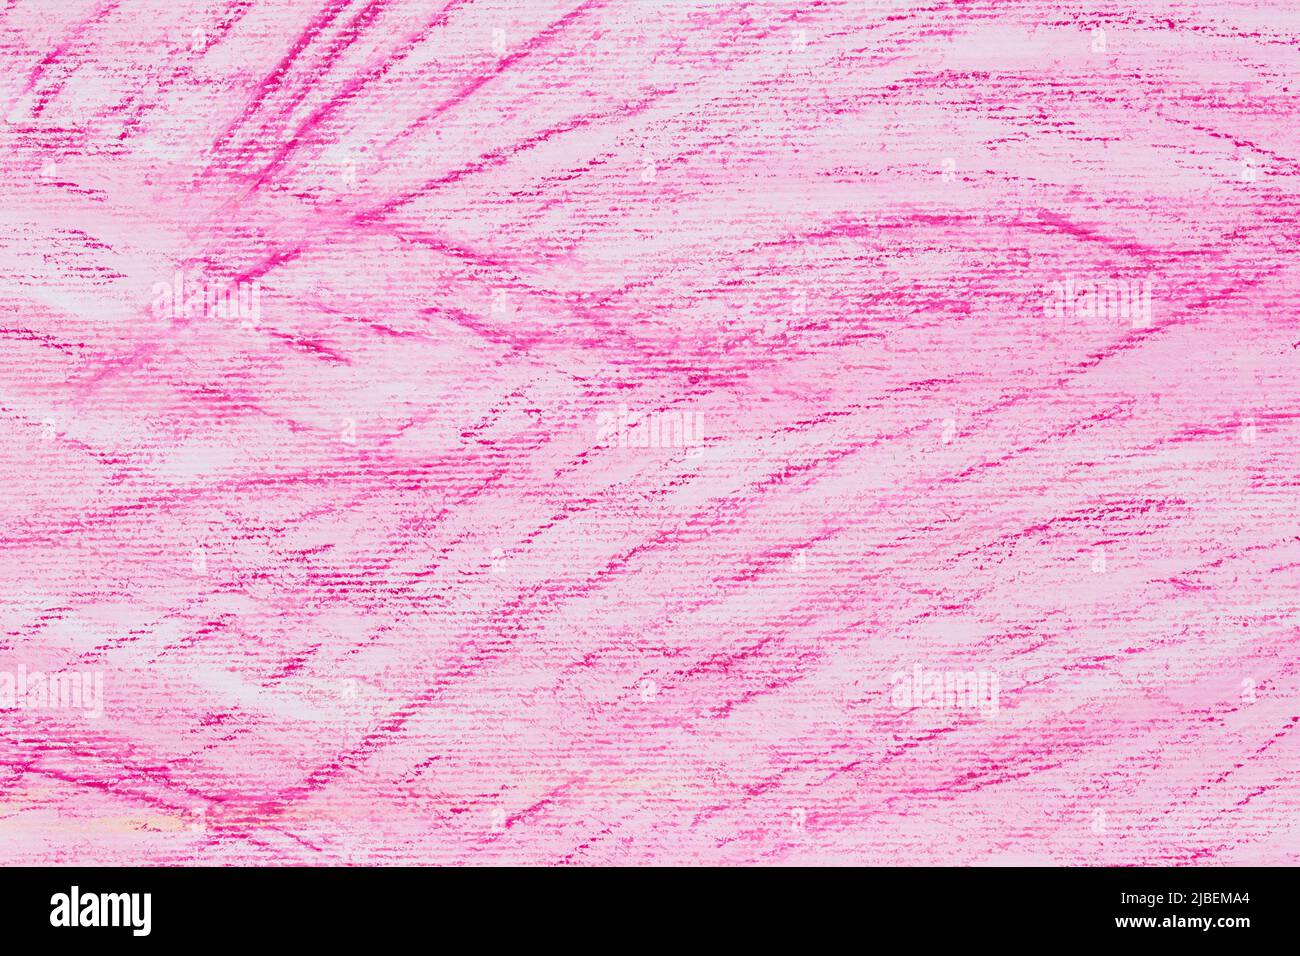 pink color crayon doodles background texture Stock Photo